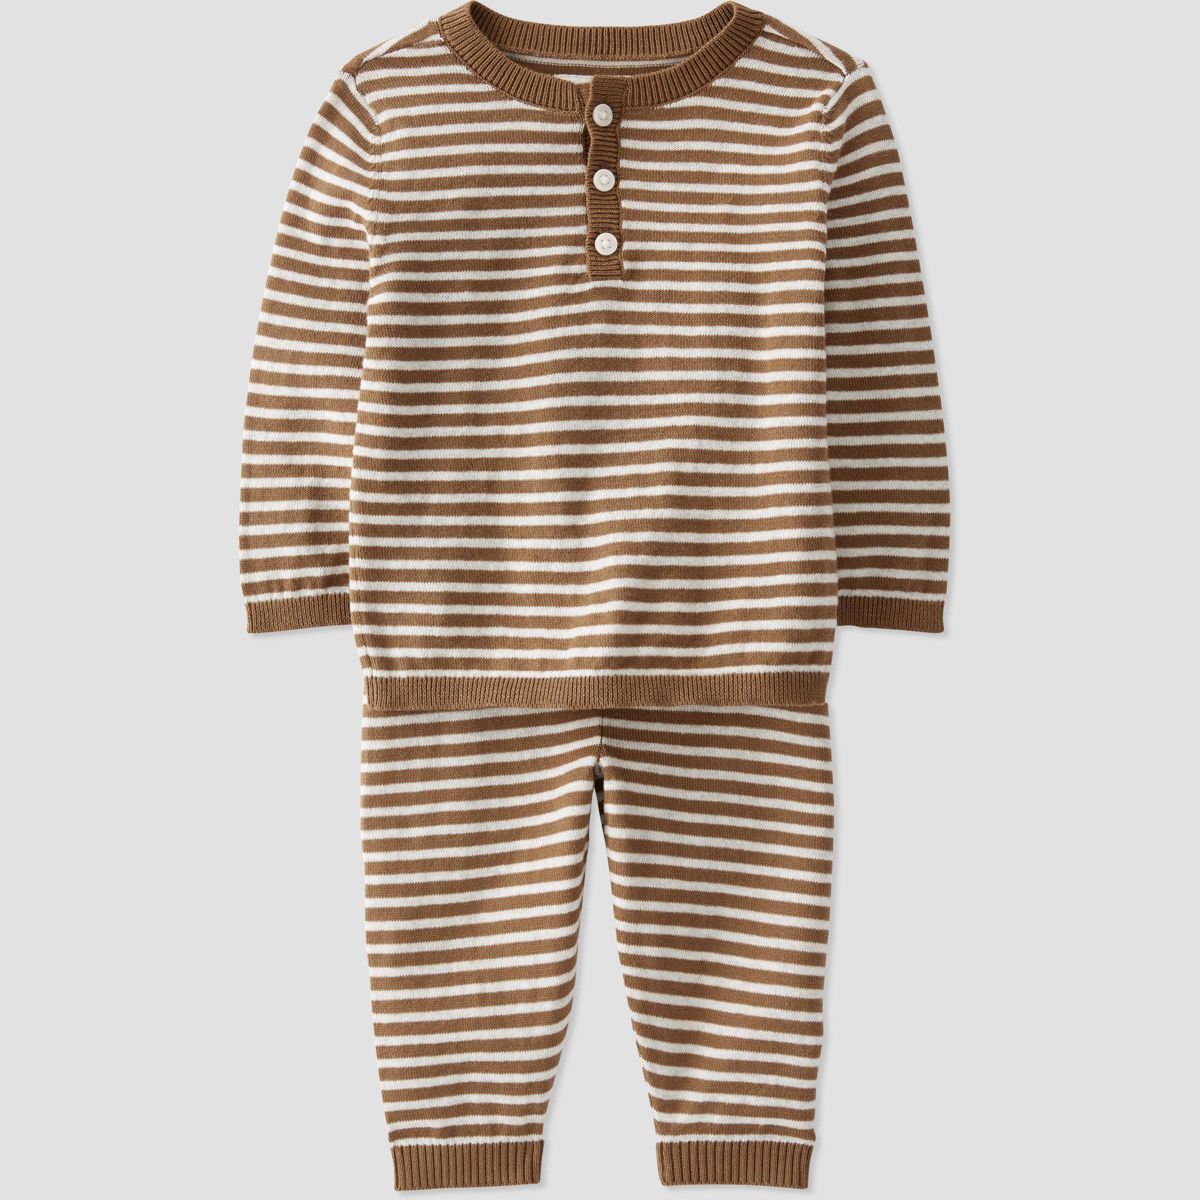 Little Planet by Carter’s Baby 2pc Striped Top and Bottom Set - White/Brown | Target